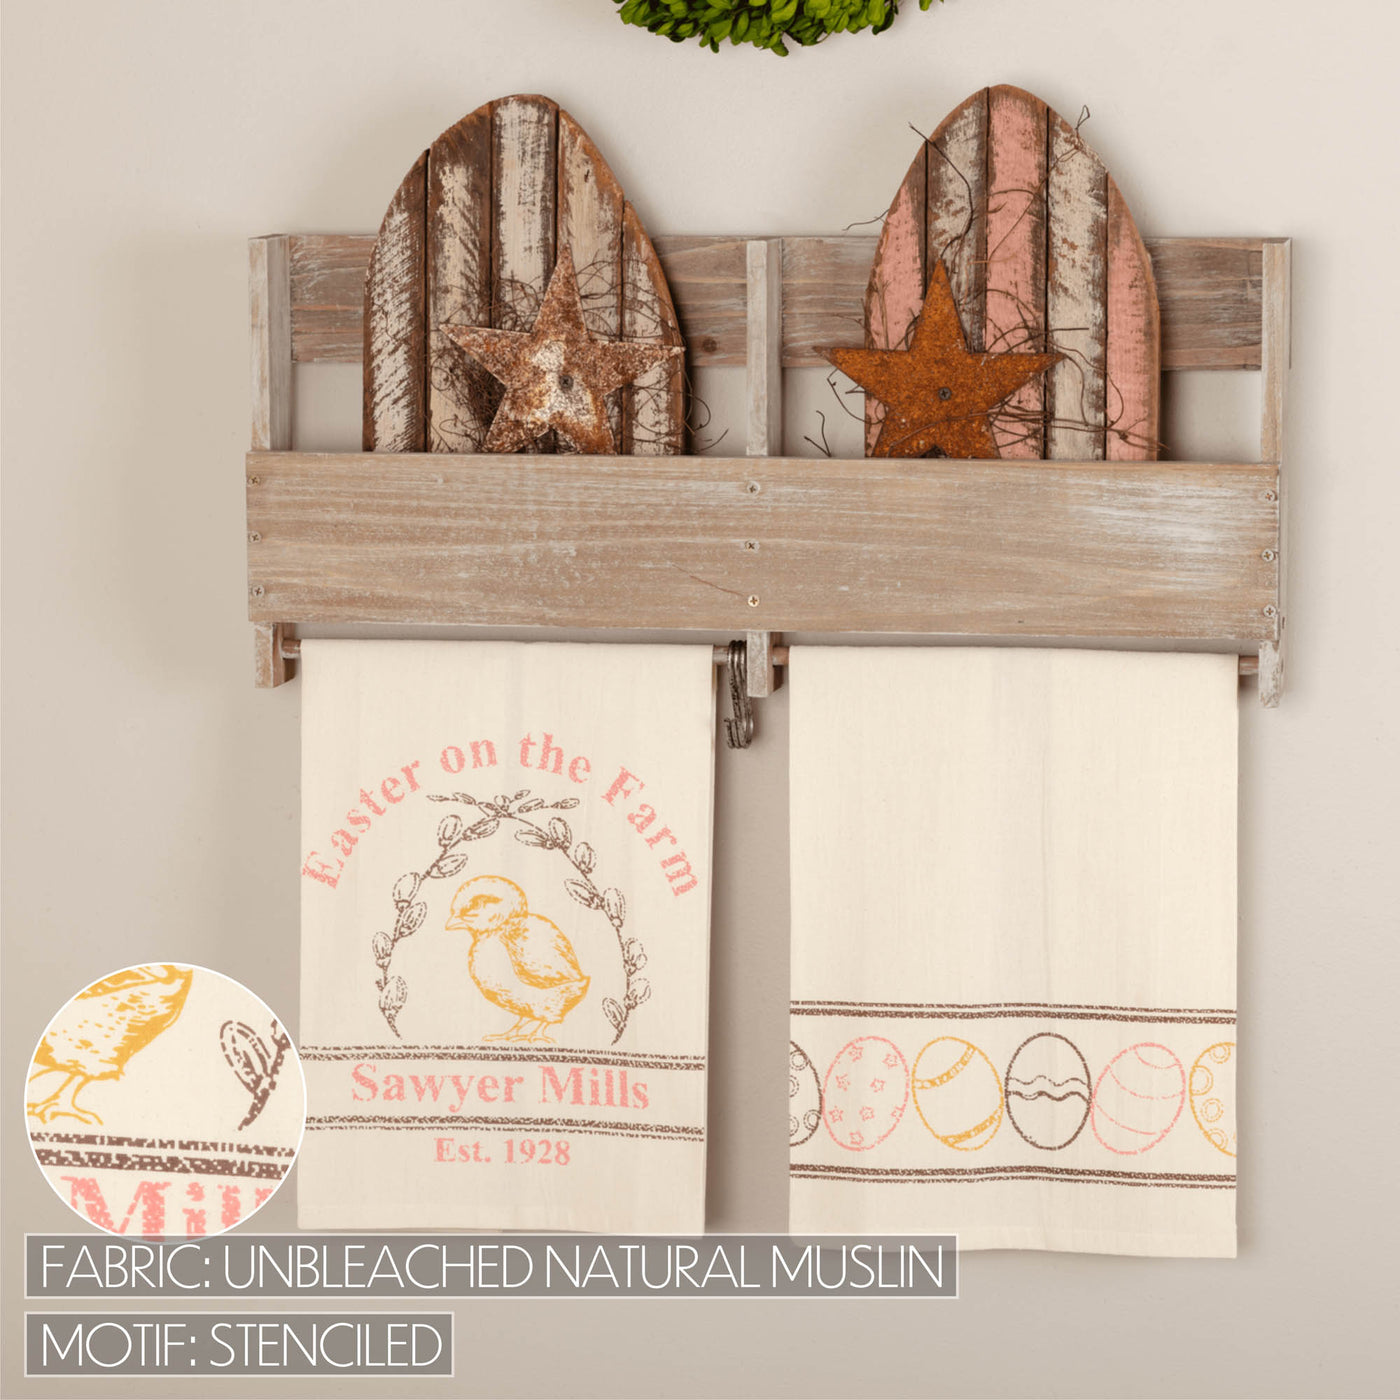 DAY 8 🐇🐥 20 DAYS OF BUNNIES + CHICKS Easter on the Farm Chick Unbleached Natural Muslin Tea Towel Set of 2